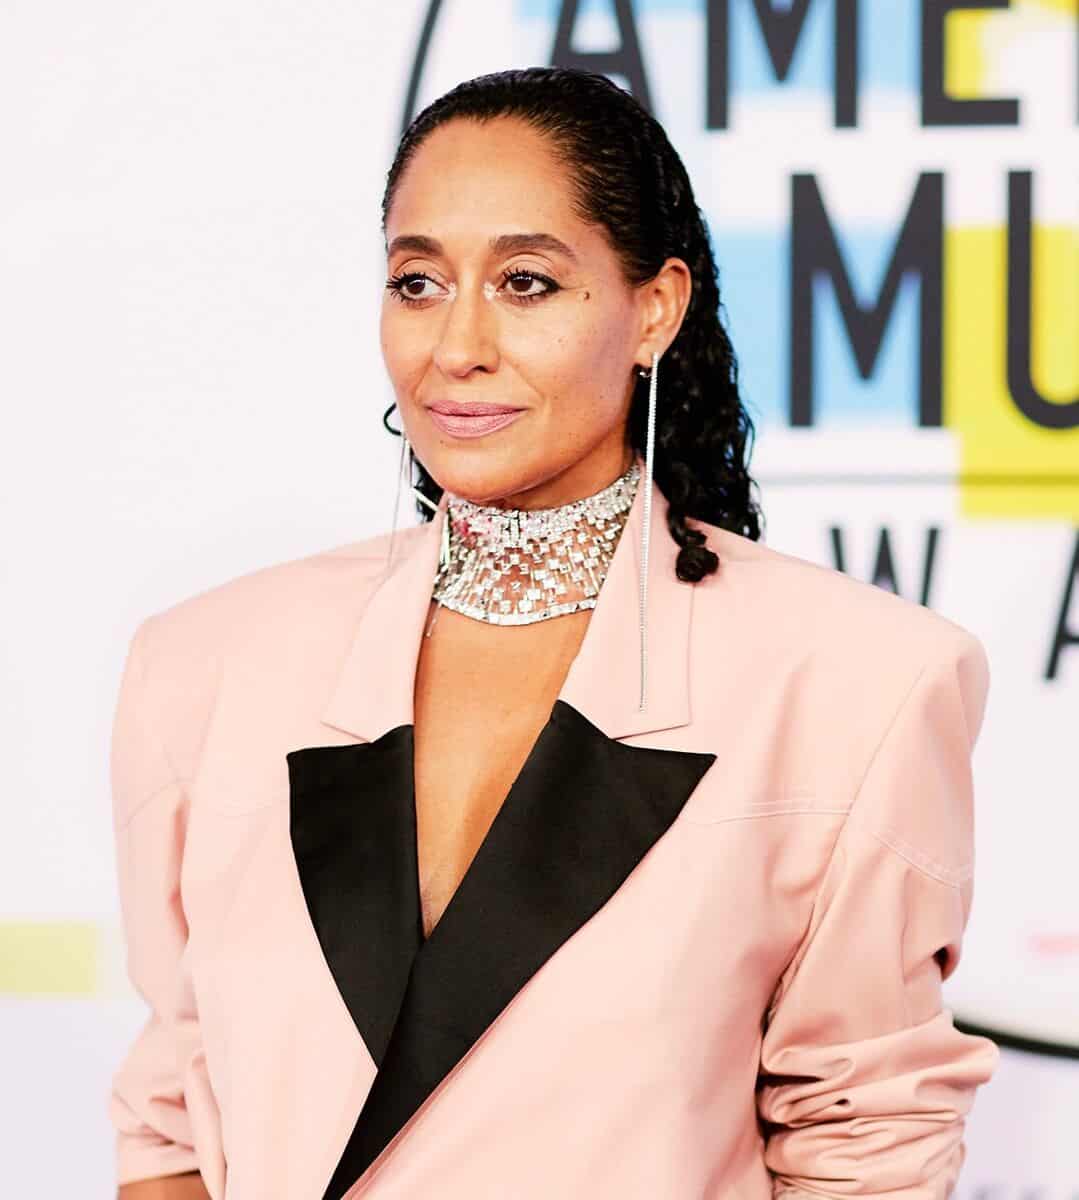 Tracee Ellis Ross - Famous Television Producer